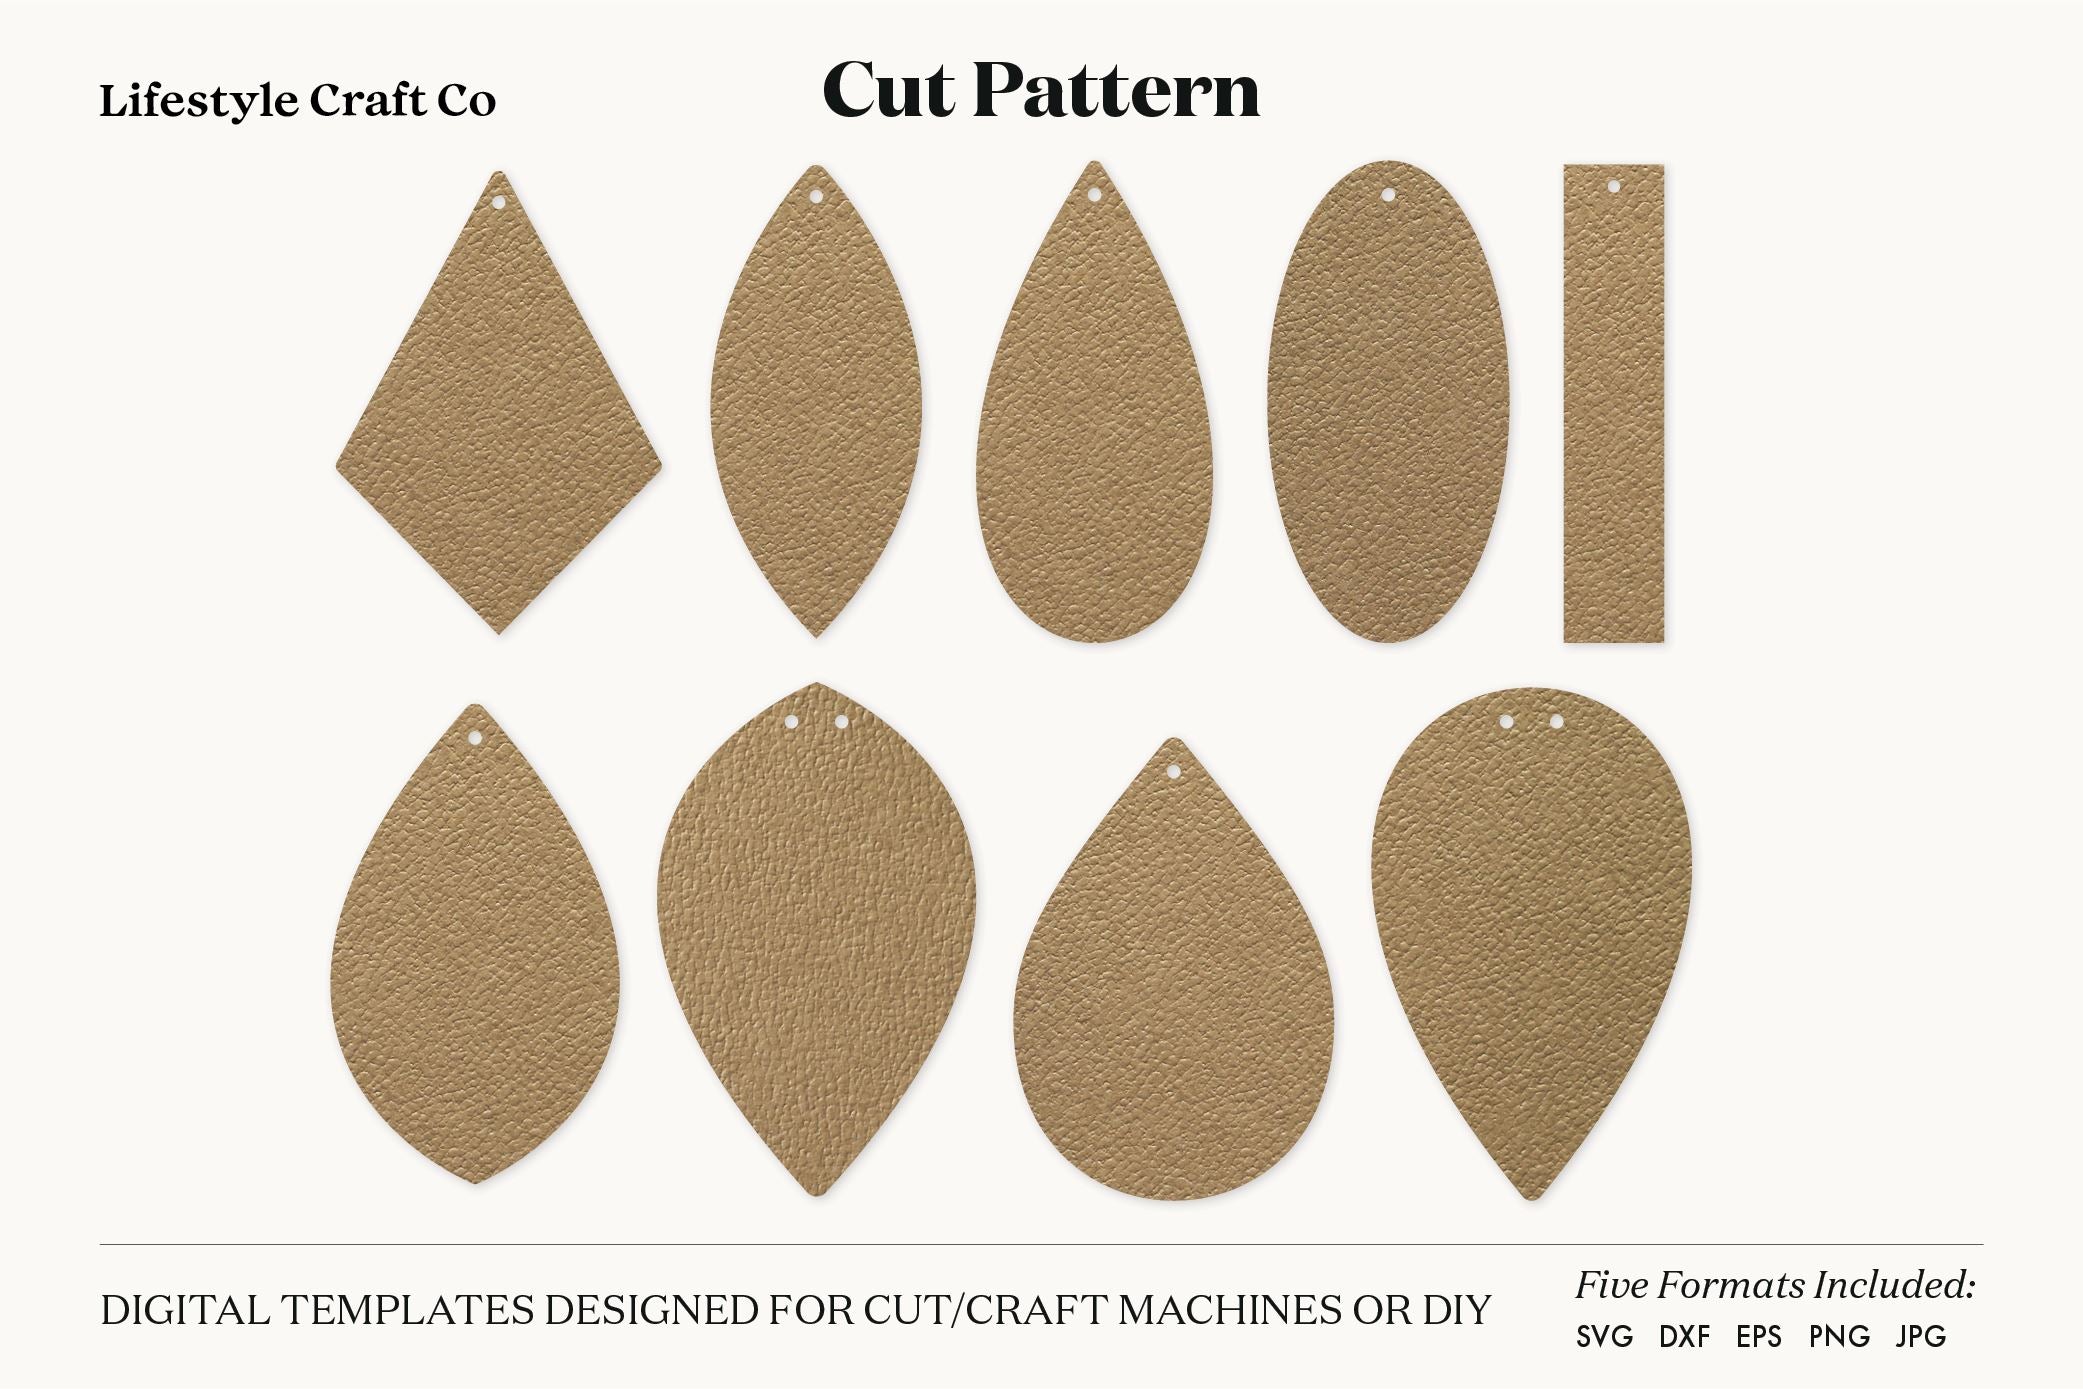 DIY Faux Earrings with Cricut: How To Cut Faux Leather on Cricut 